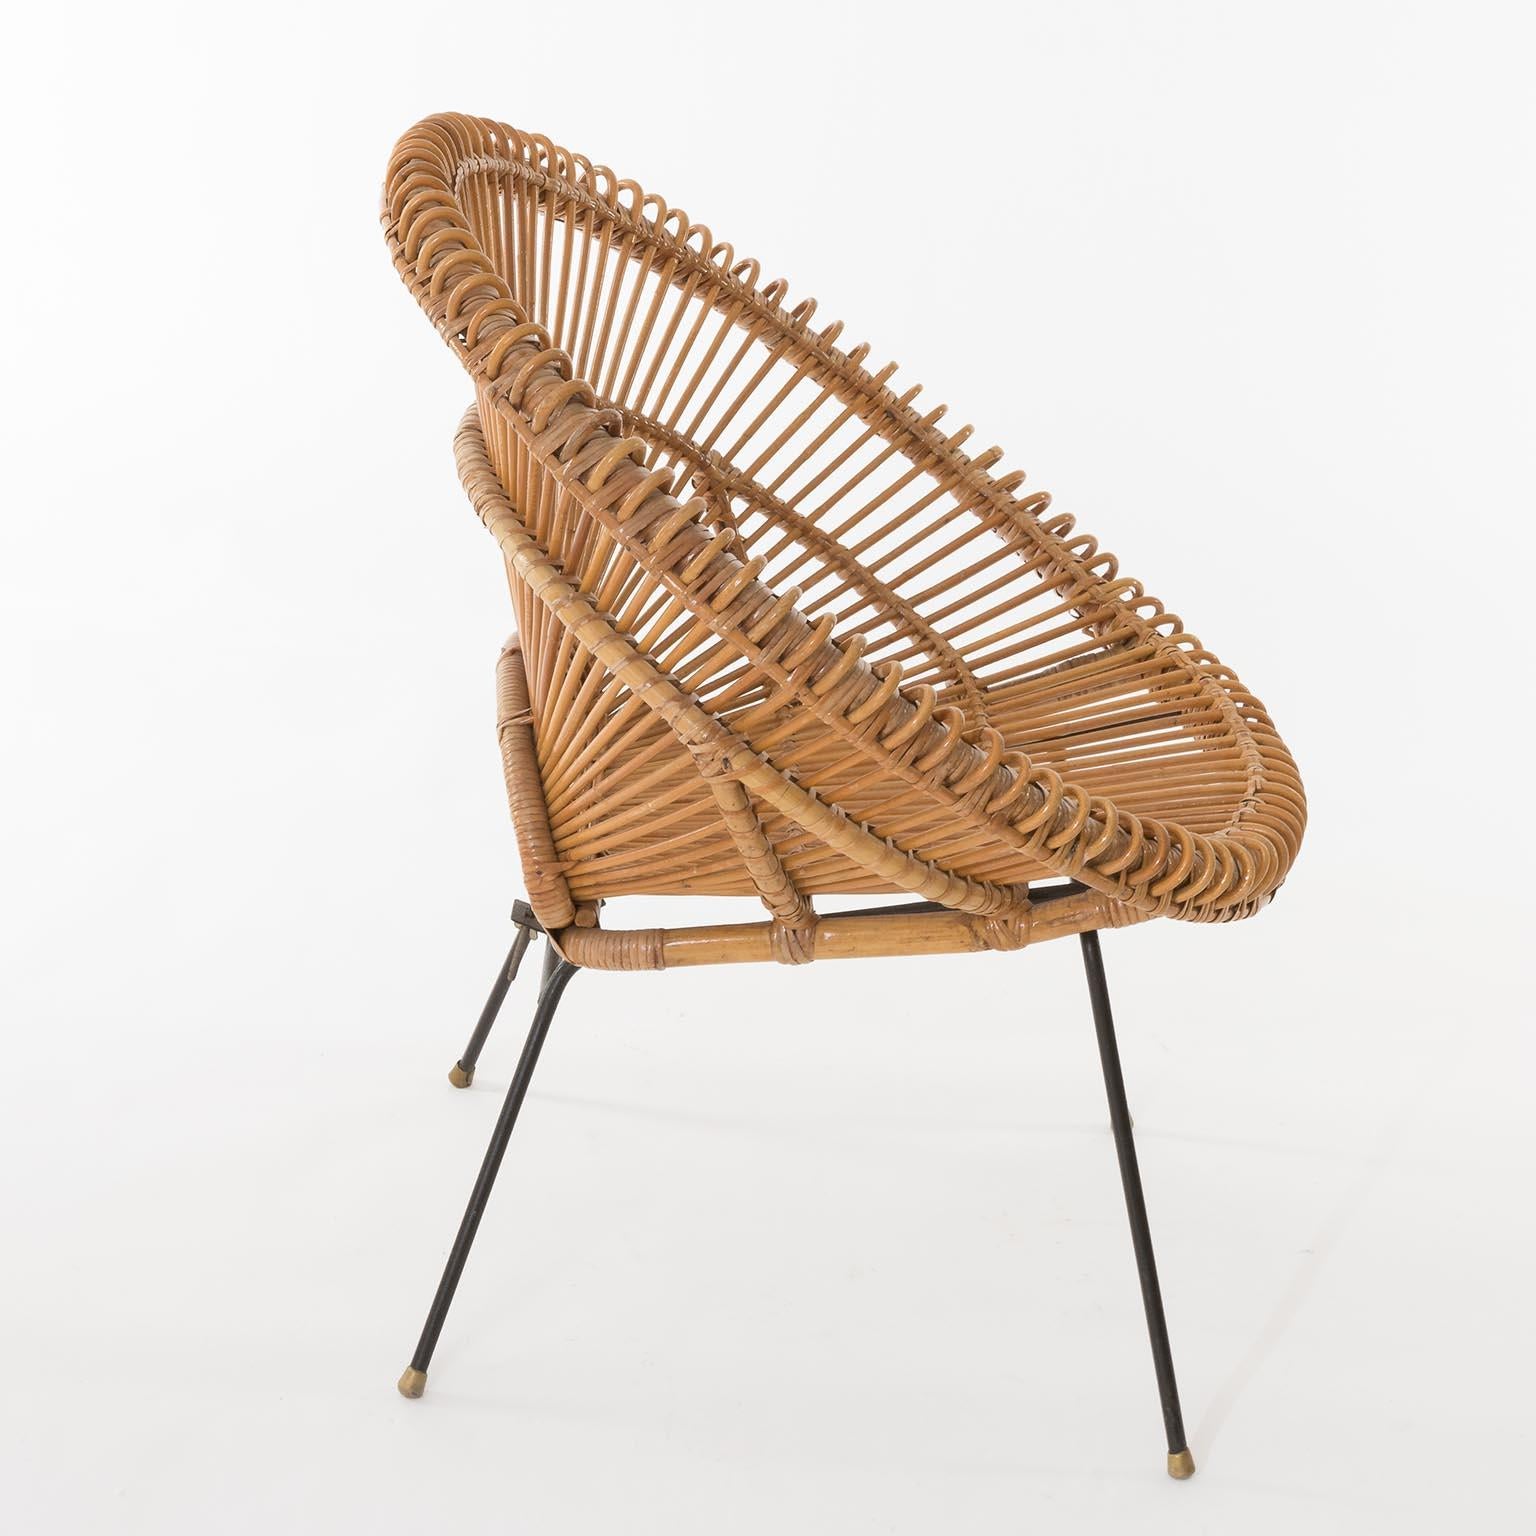 Set Four Mid-Century Modern Rattan Bamboo Chairs, Janine Abraham, Dirk Rol, 1960 For Sale 5